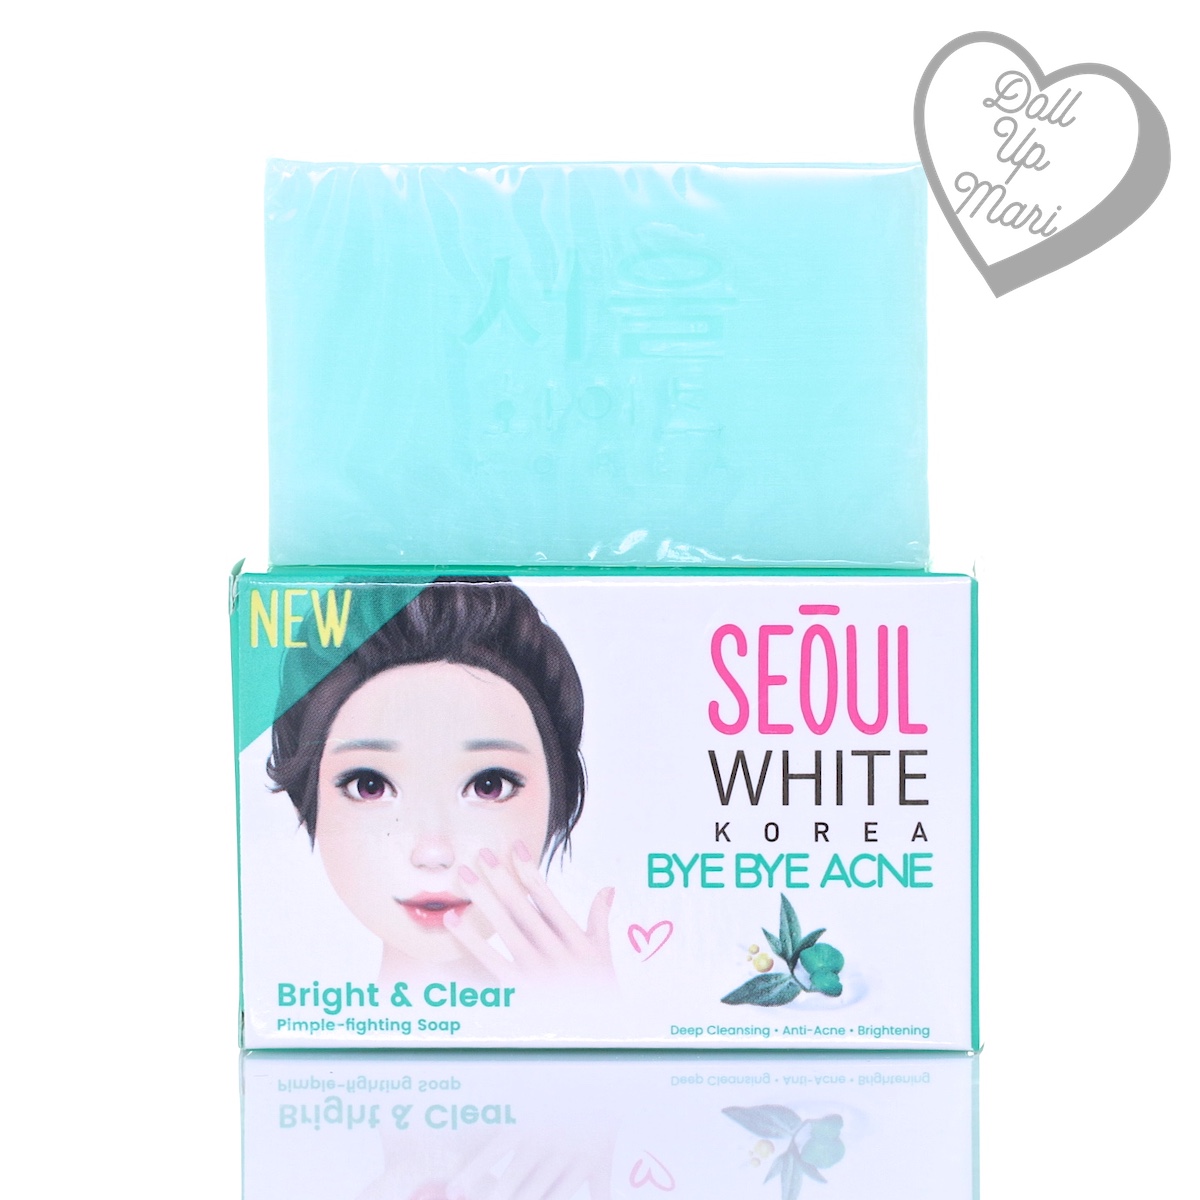 Pack Shot of Seoul White Bye Bye Acne Bright and Clear Pimple Fighting Soap Single Pack